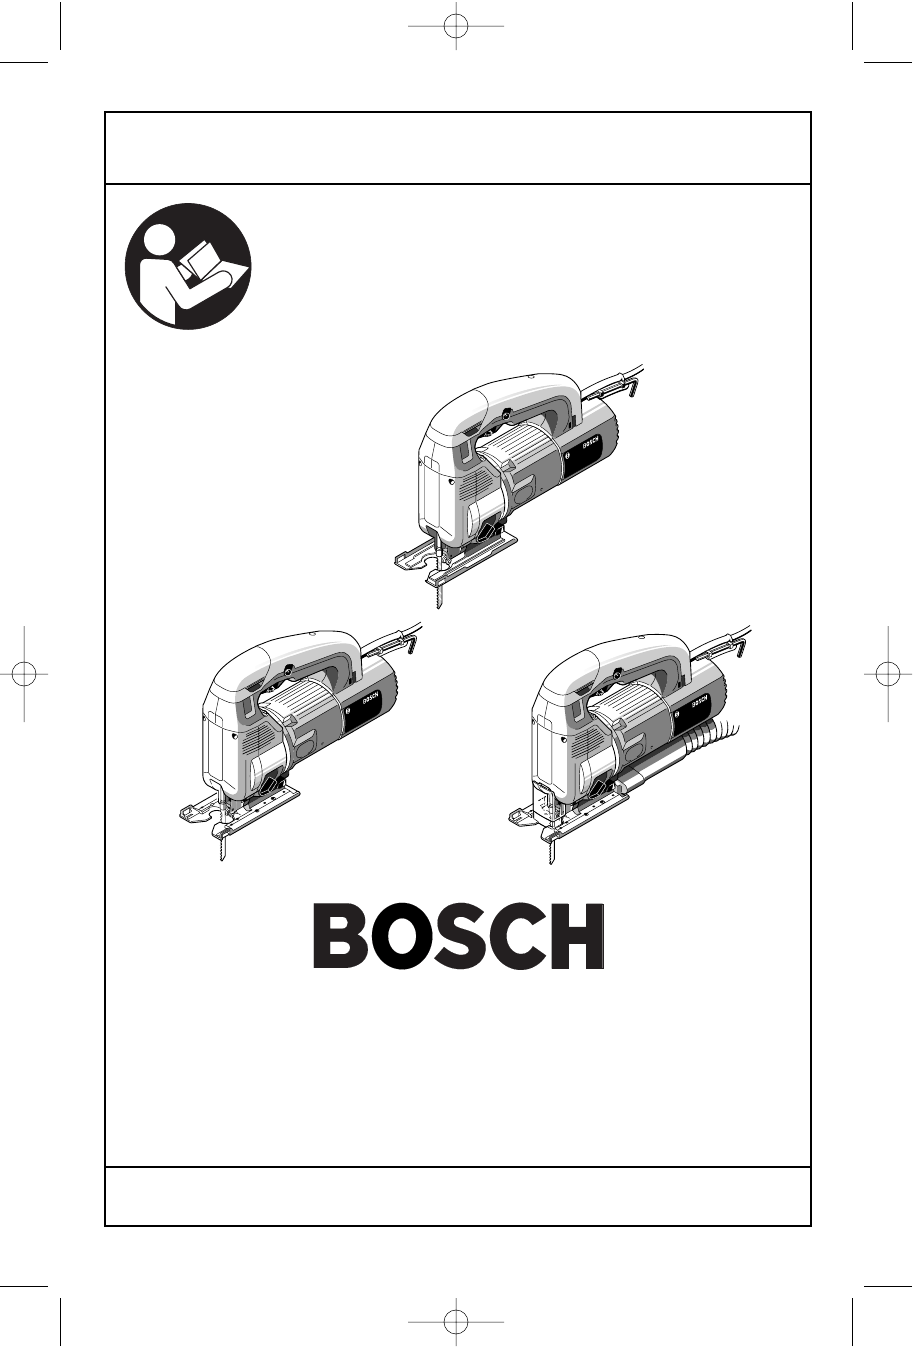 Bosch 1581vs owners manual